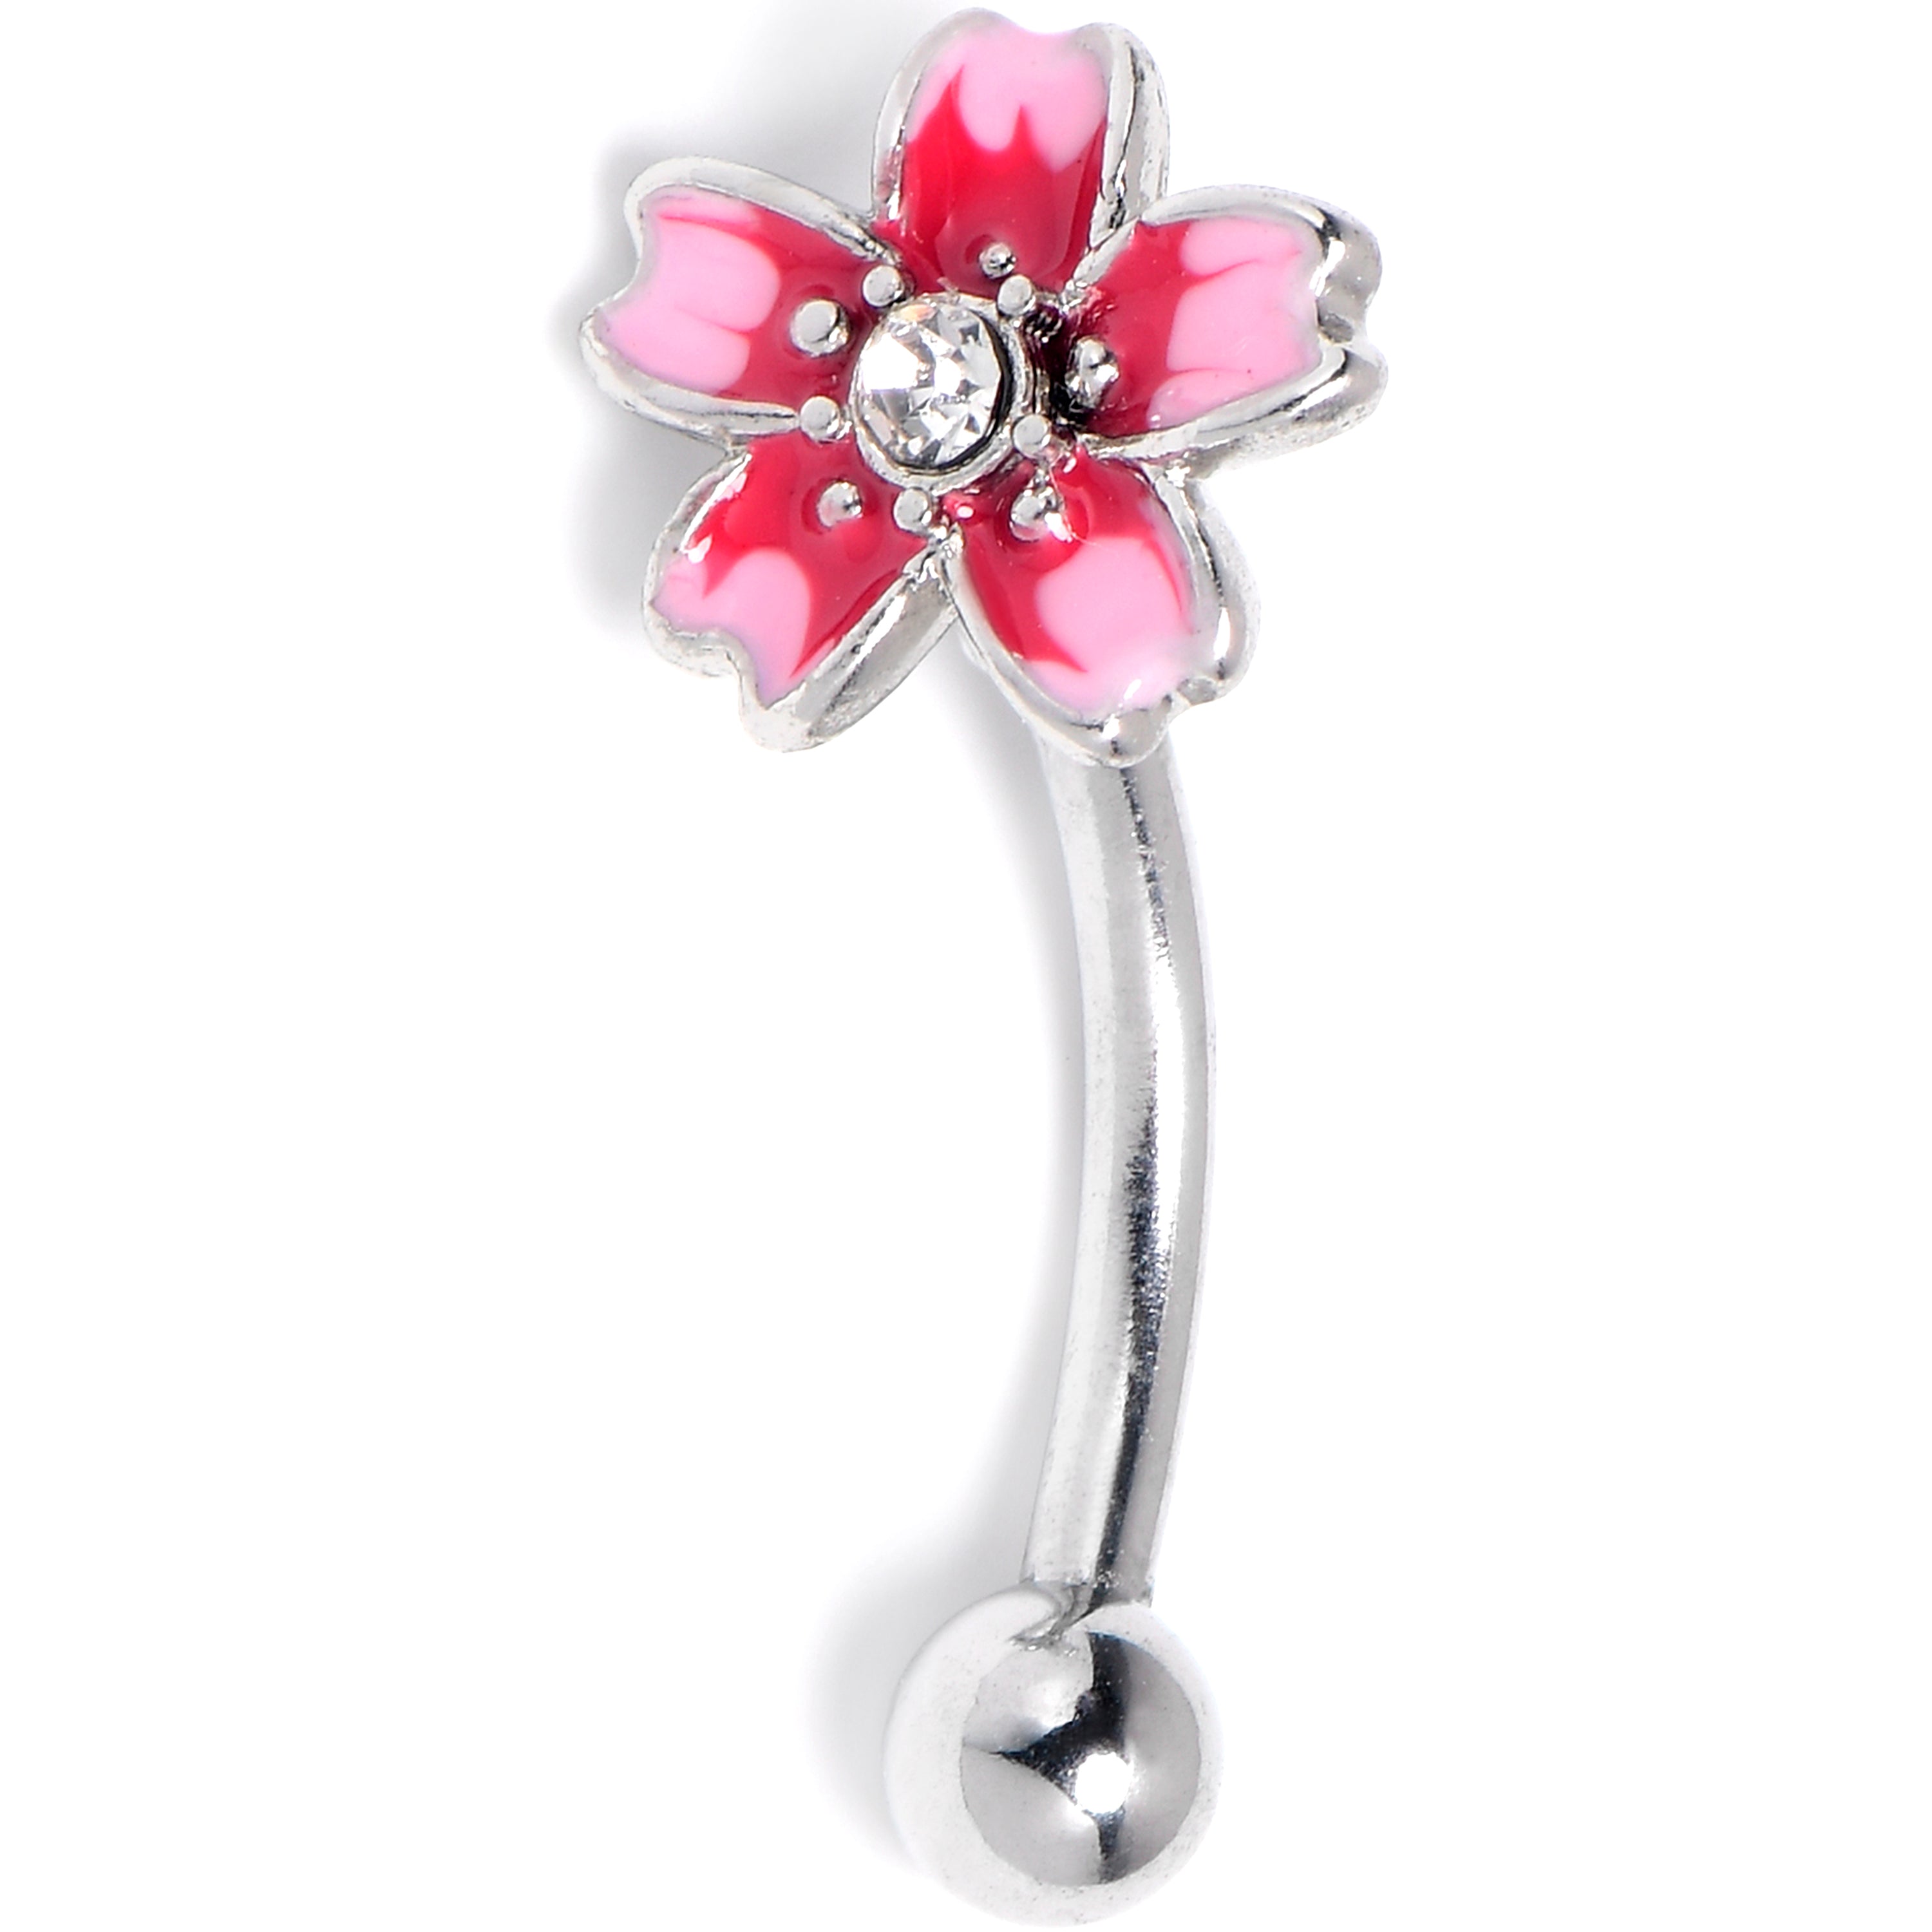 16 Gauge 5/16 Clear Gem Perfectly Pink Flower Curved Eyebrow Ring